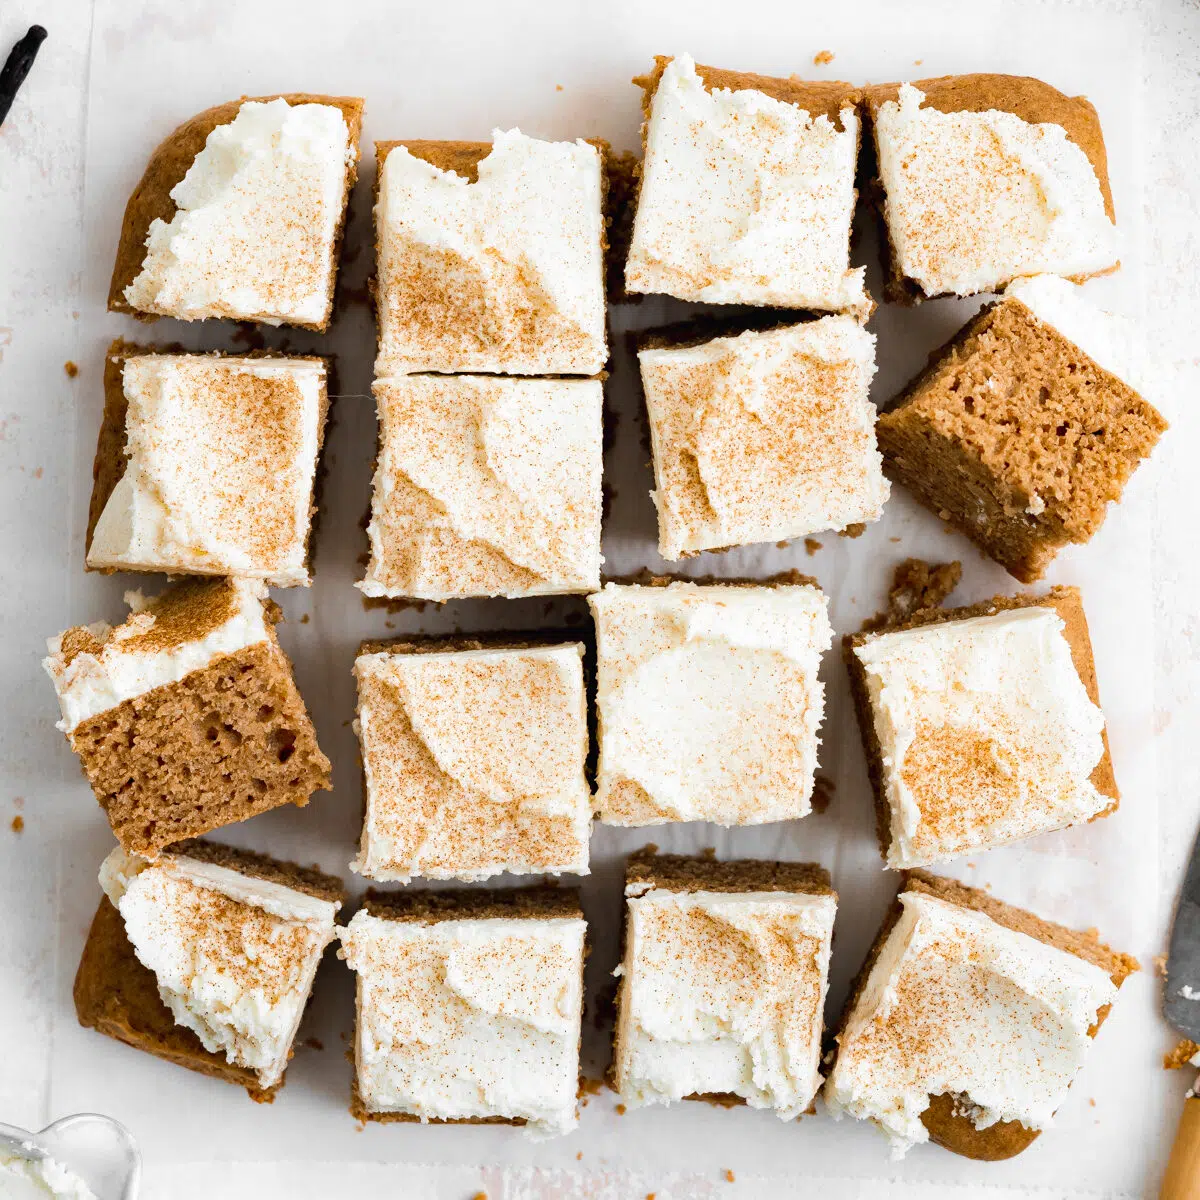 sliced vegan sheet cake with chai spices and cream cheese frosting.